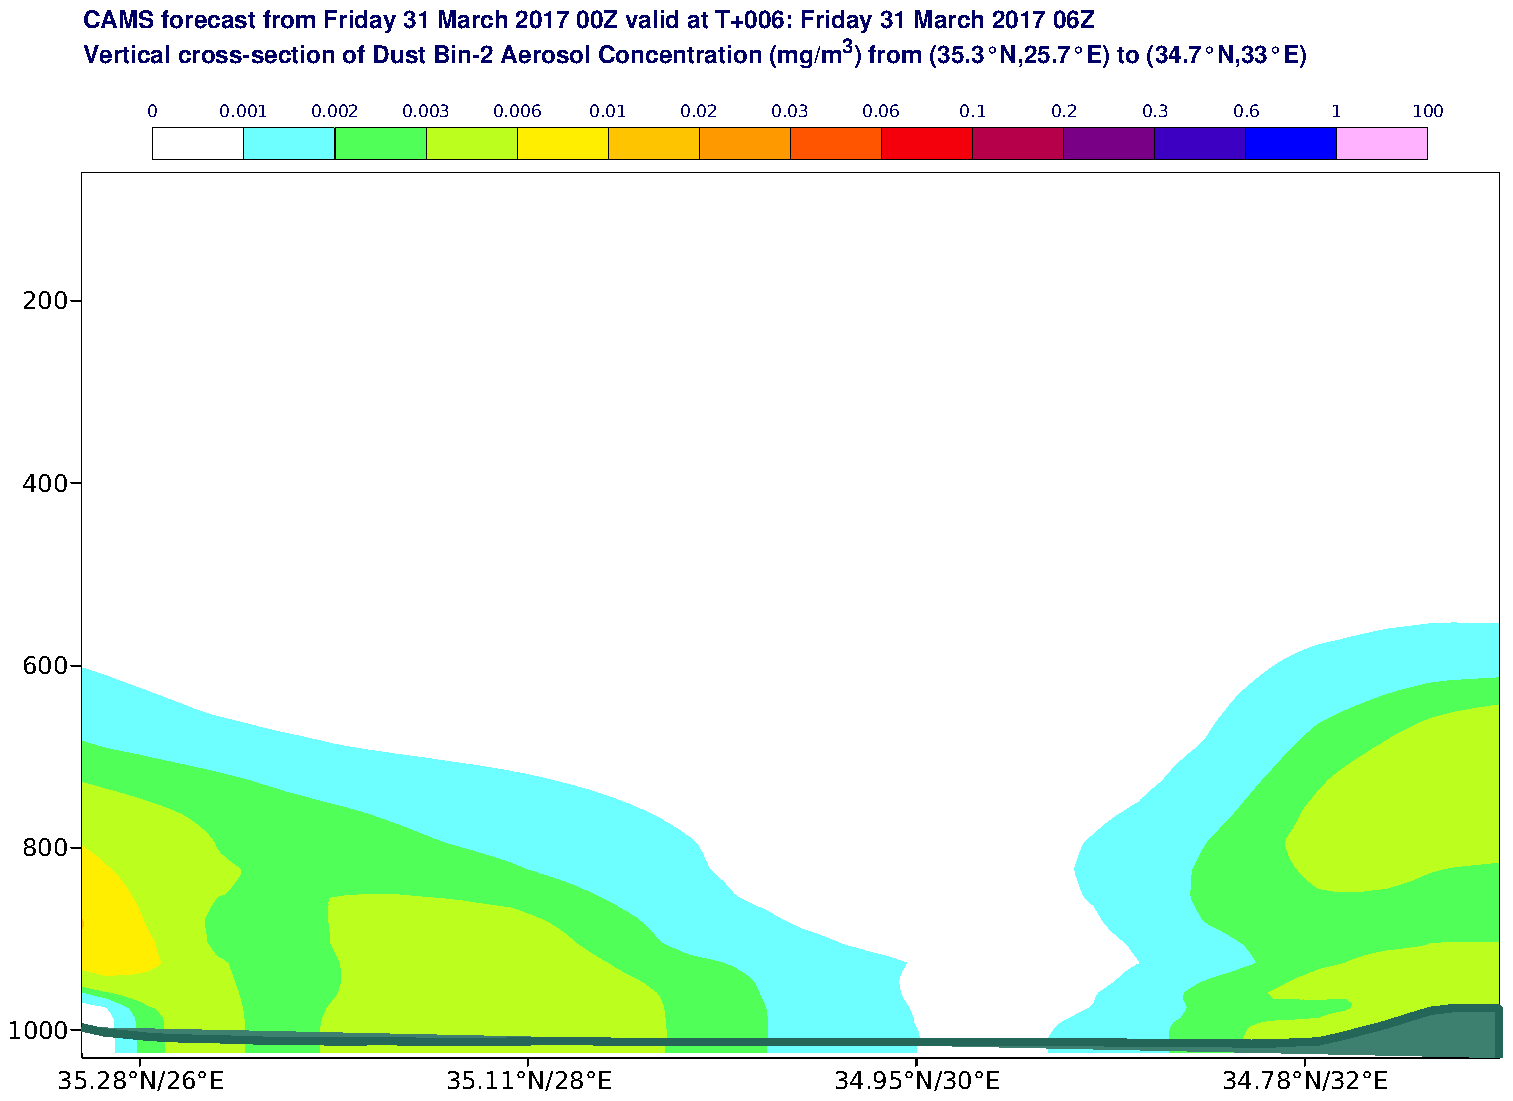 Vertical cross-section of Dust Bin-2 Aerosol Concentration (mg/m3) valid at T6 - 2017-03-31 06:00